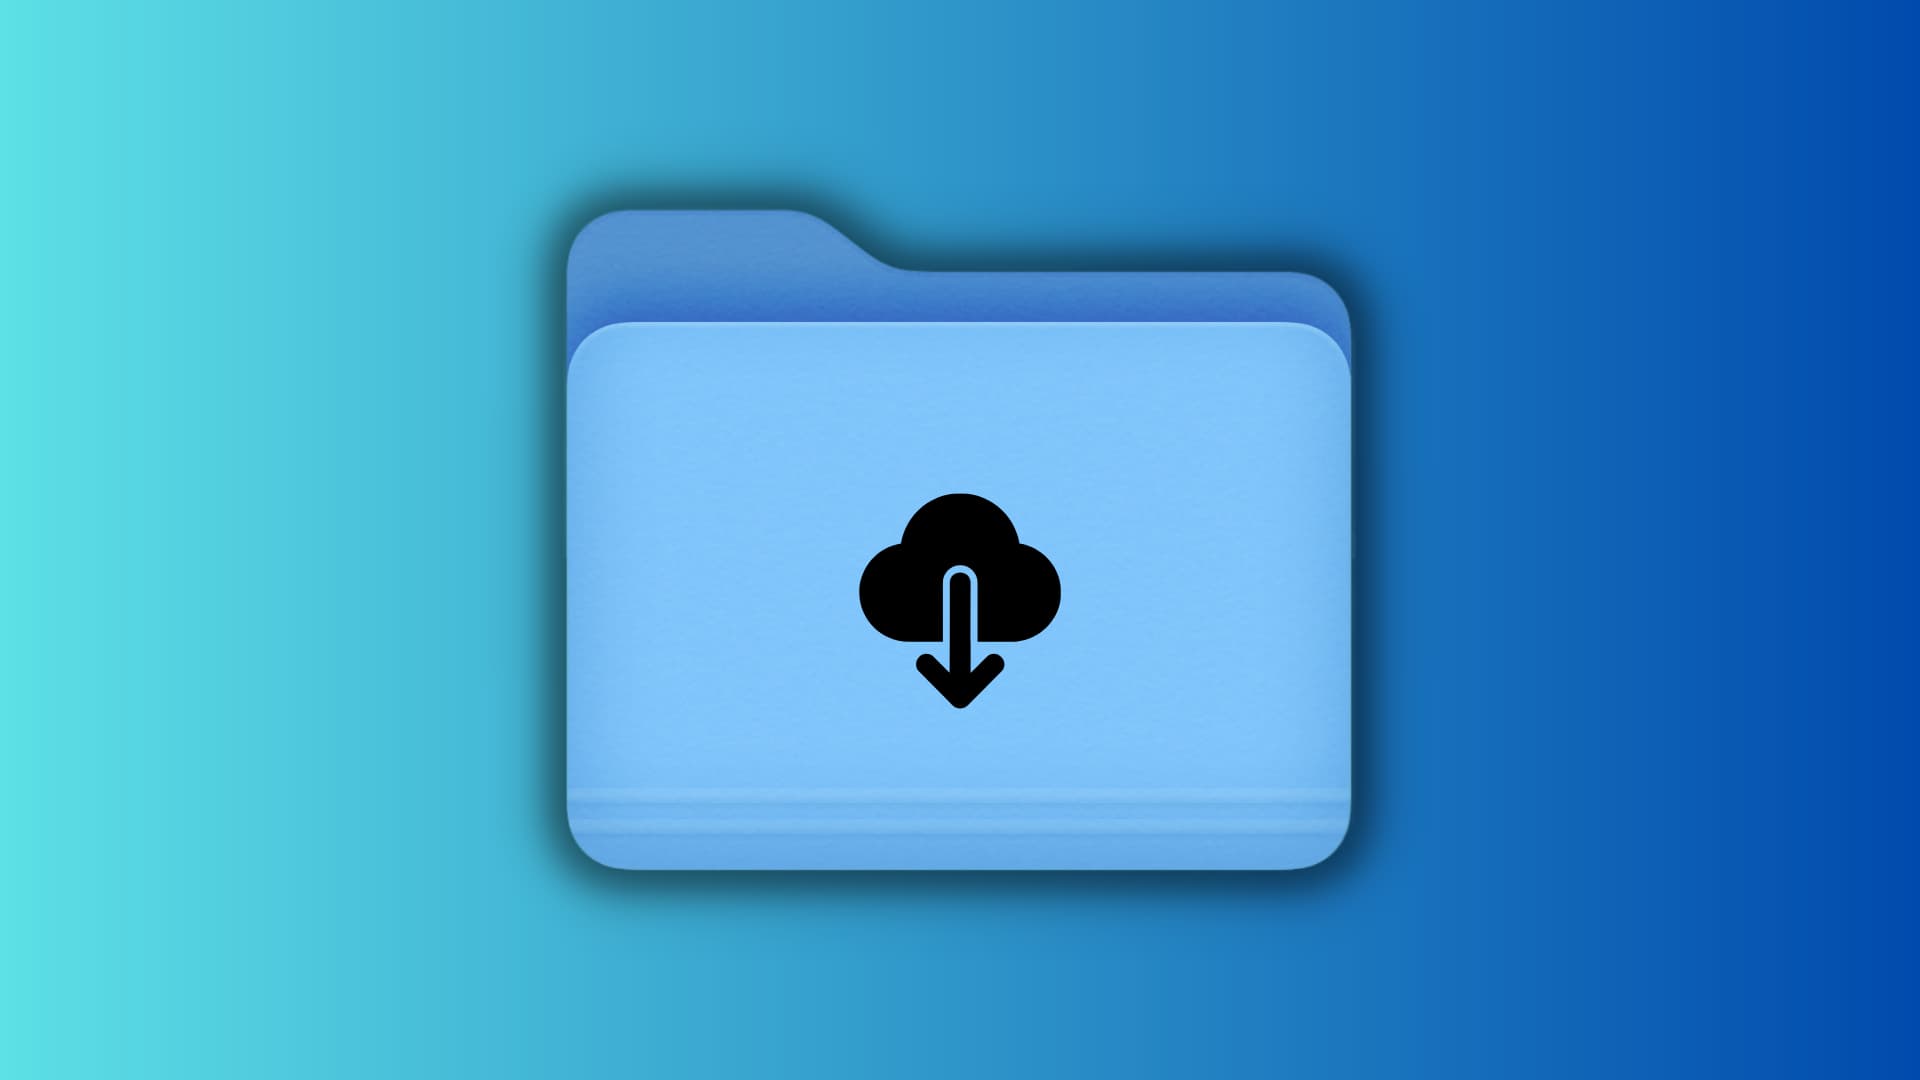 Mac Finder folder icon with a download icon over it